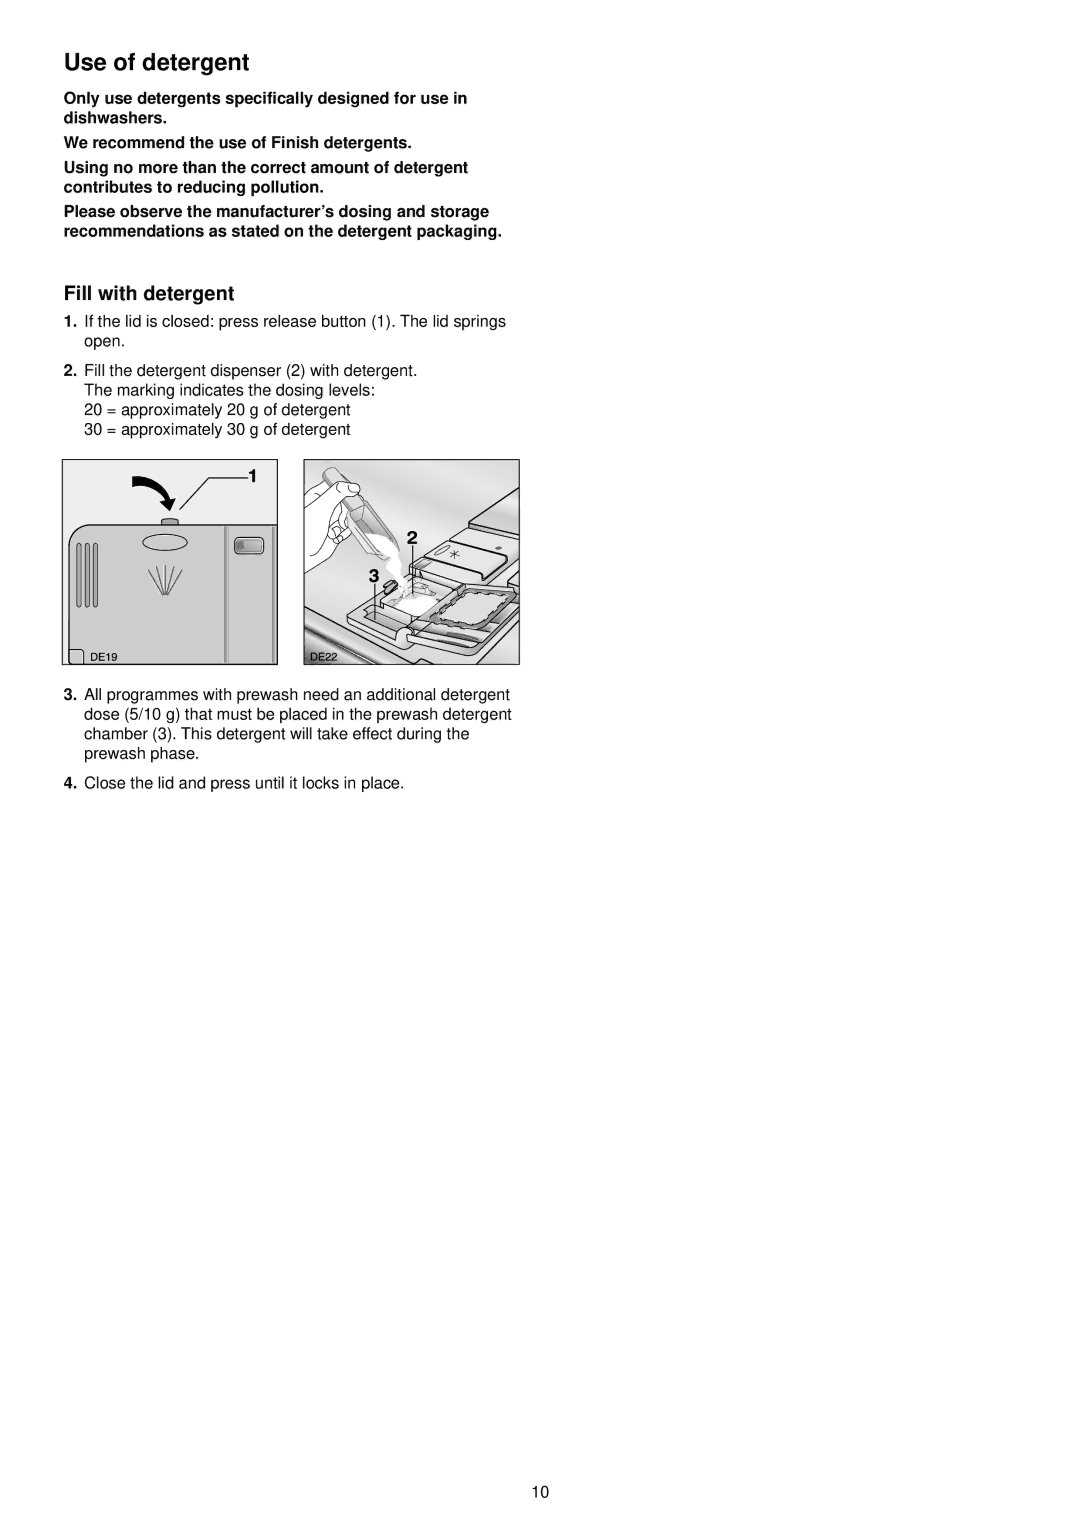 Electrolux ESI 6105 manual Use of detergent, Fill with detergent 